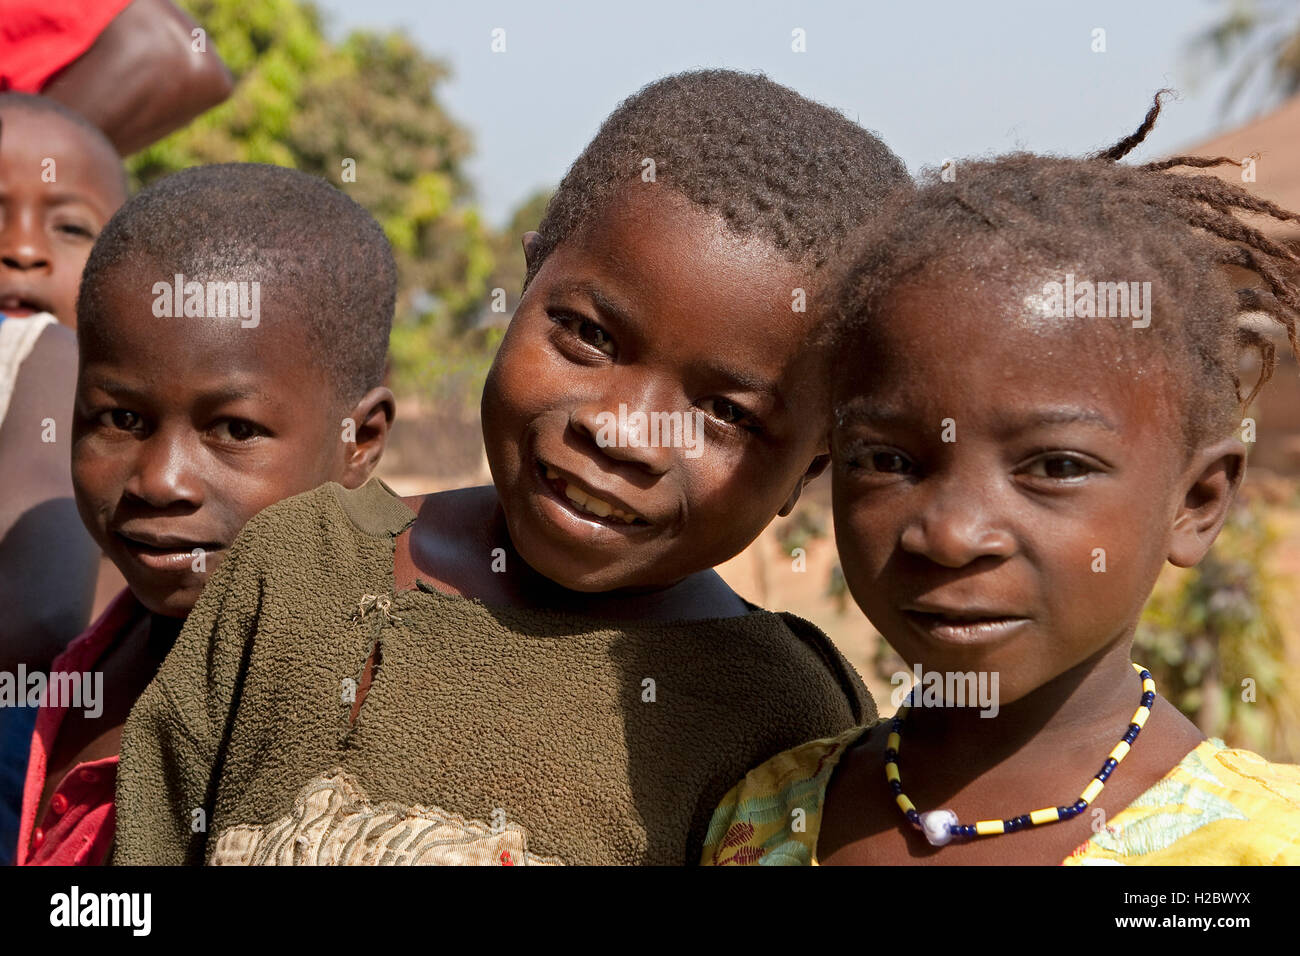 Group of disadvantaged very young local village African children from north Sierra Leone, who do not attend school as education is not free. Stock Photo